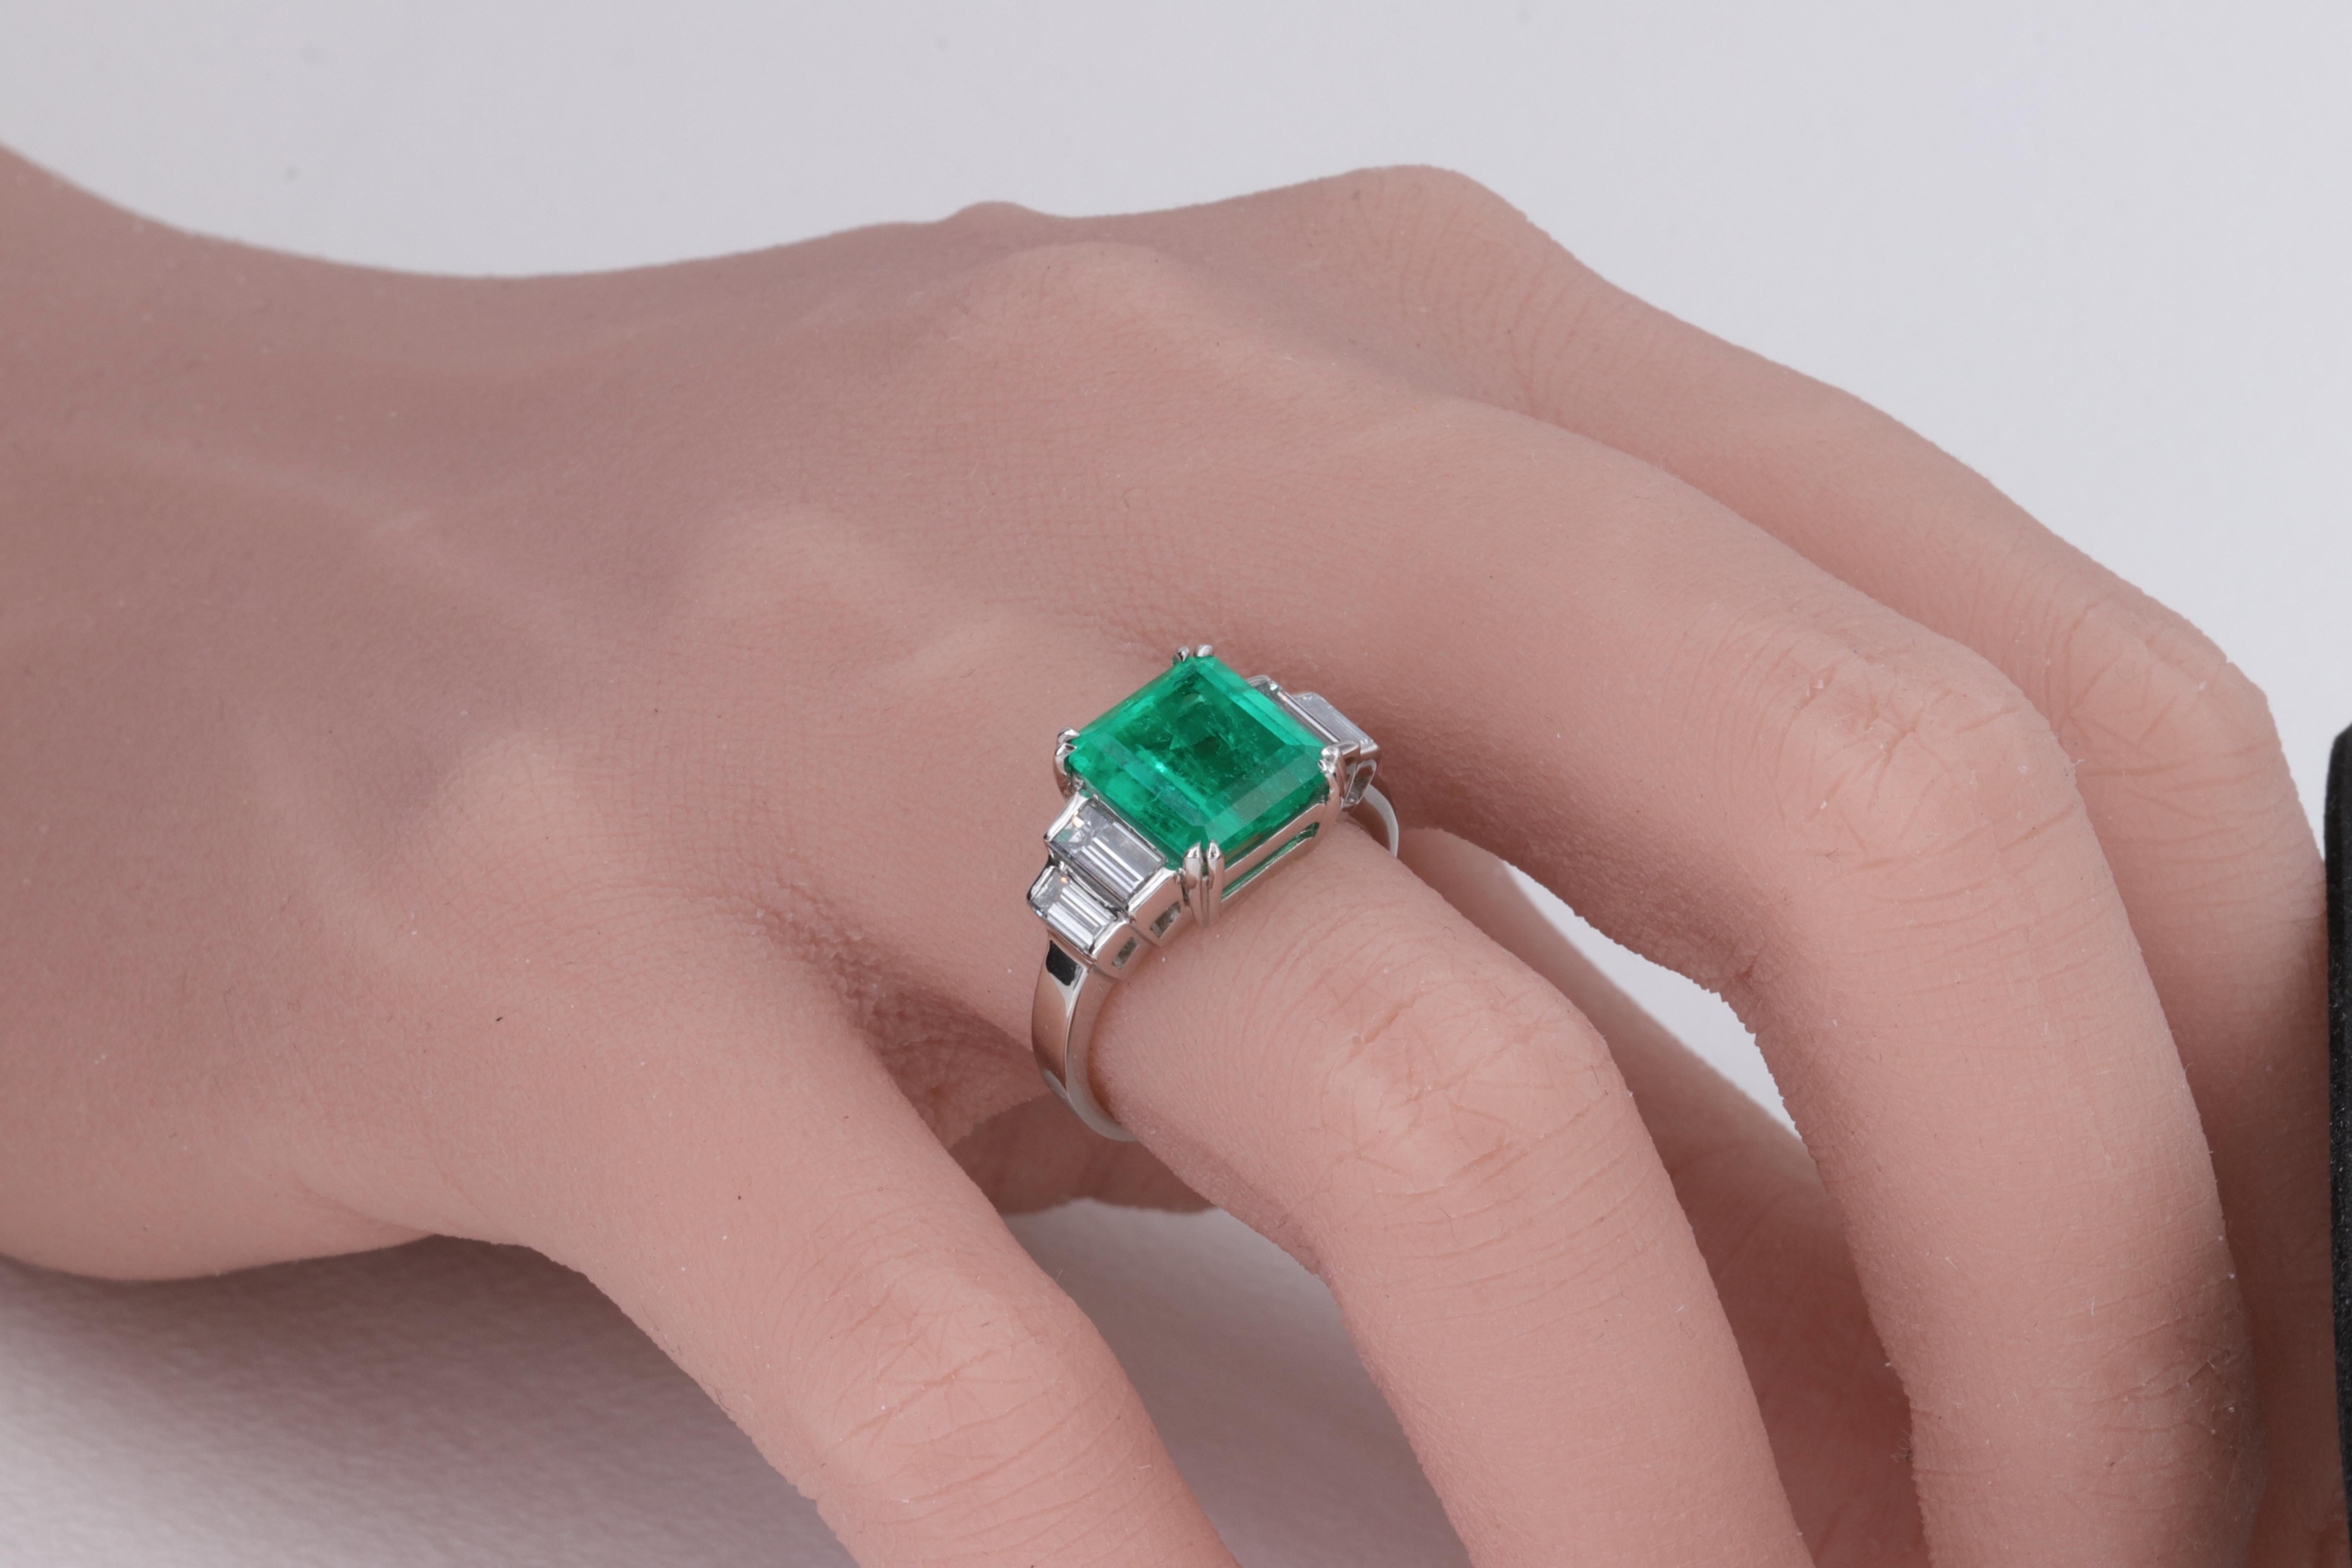 Colombian Emerald GIA and Baguette Diamond 5 Stone Platinum Ring

This well crafted platinum 5 stone emerald and diamond ring is set with a gorgeous 3.27 carat Colombian Emerald center stone with a rich vibrant green color, and well matched